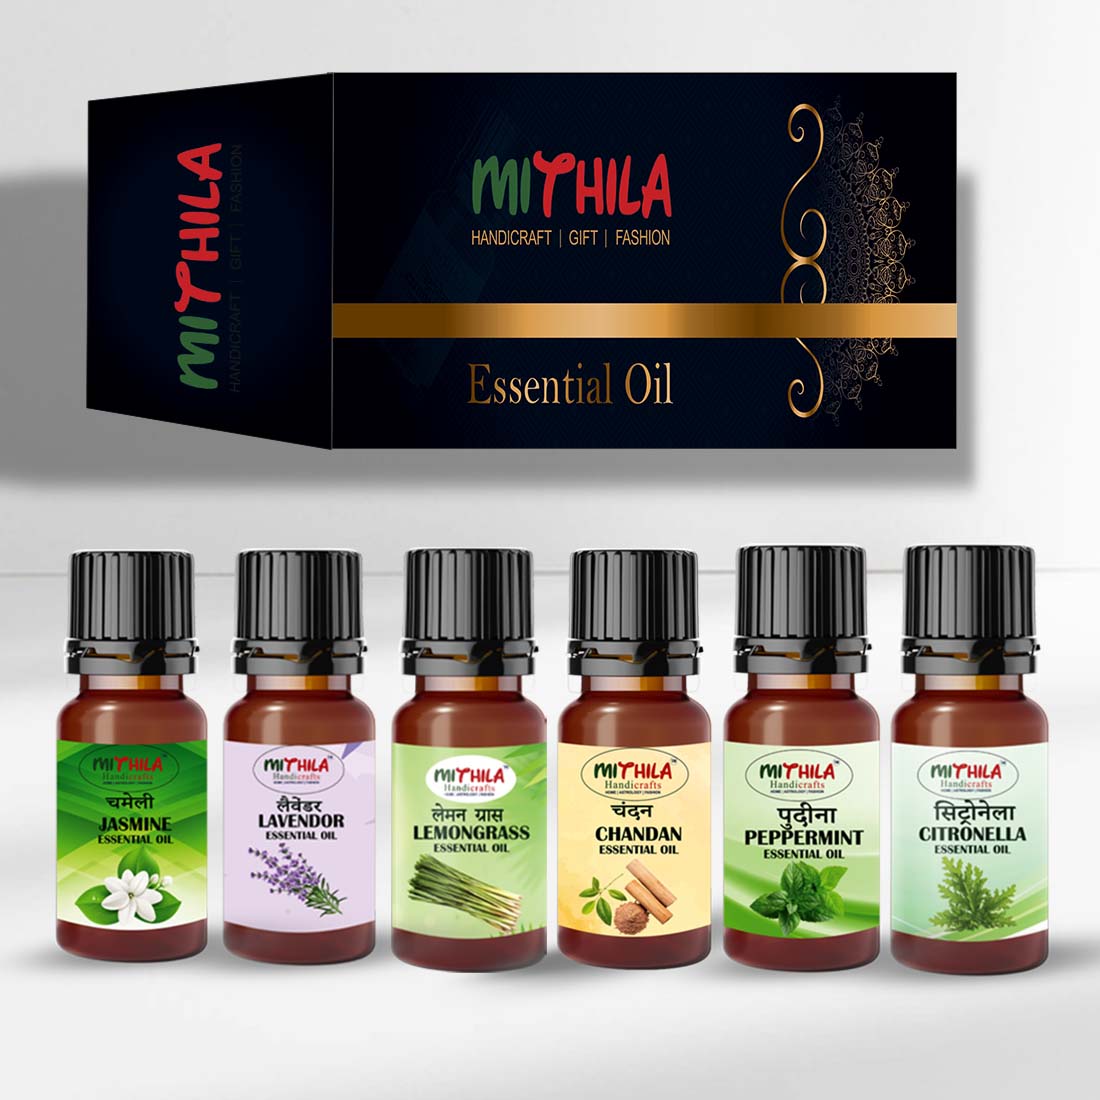 Harmony and Tranquility: A Symphony of Jasmine, Lavender, Lemongrass, Sandalwood, Peppermint, and Citronella Essential Oils 15ml Each (Pack Of 6)